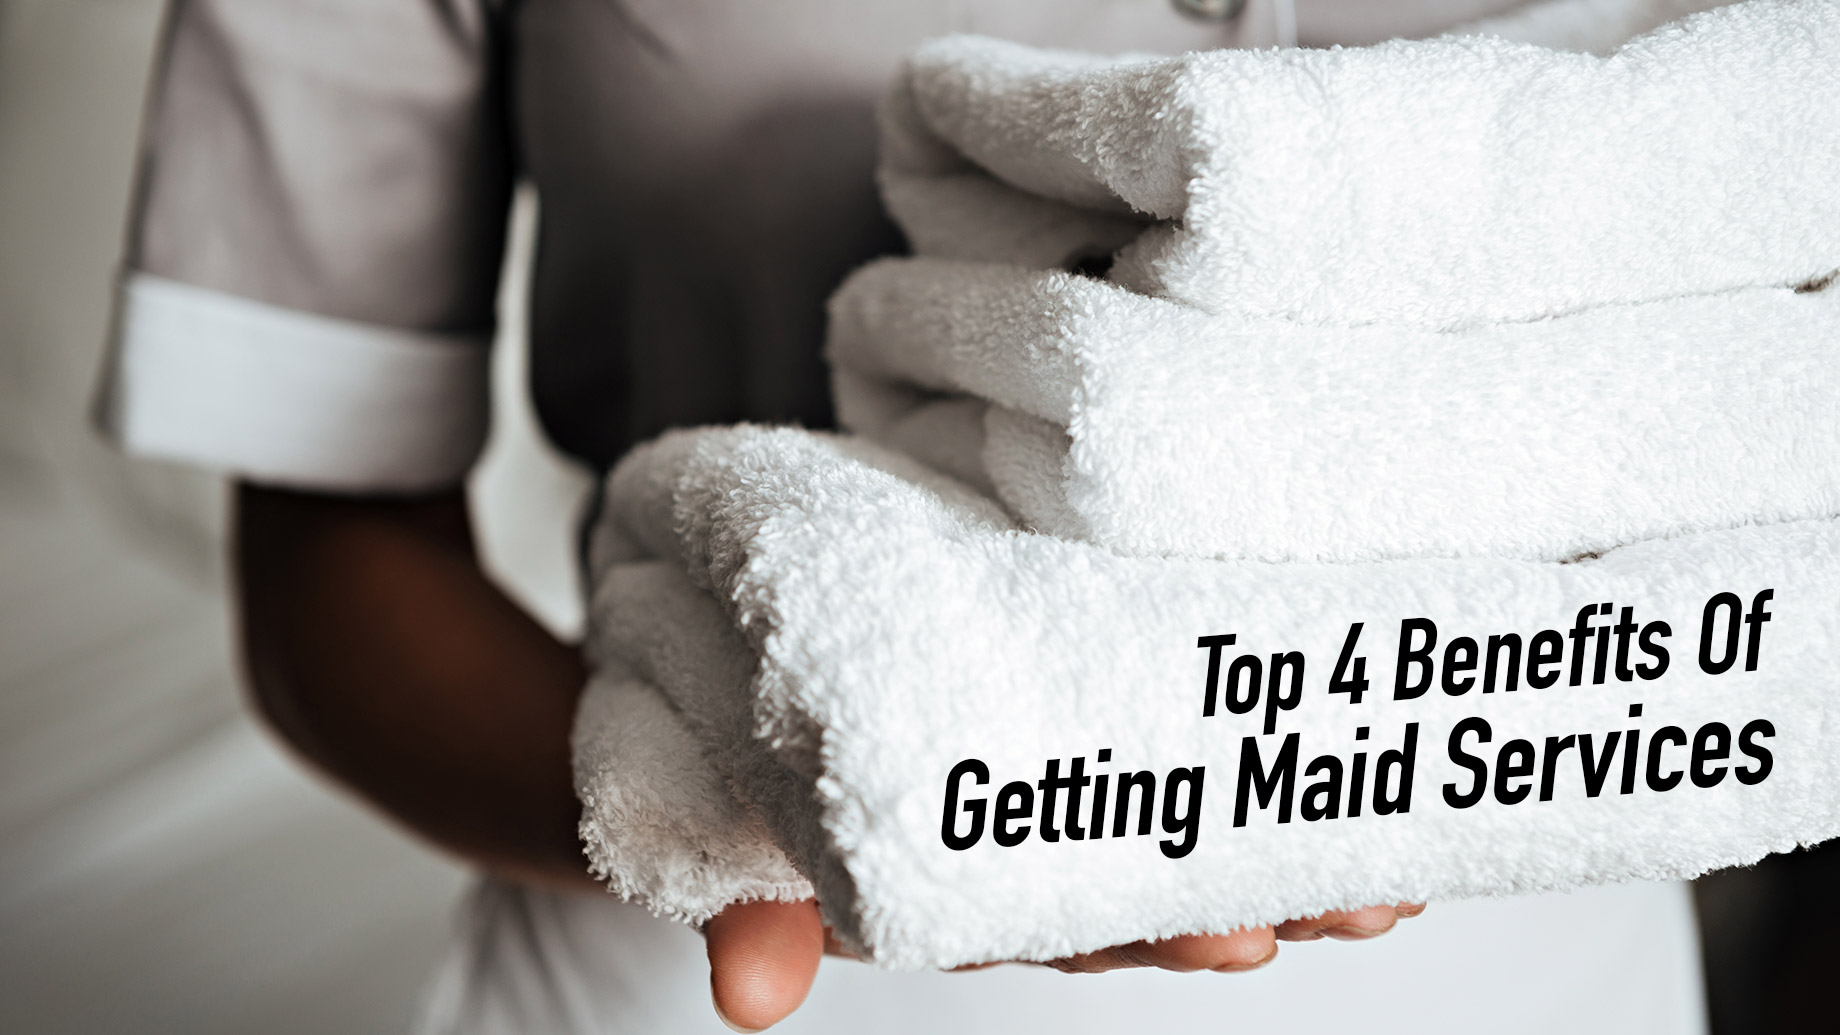 Top 4 Benefits Of Getting Maid Services